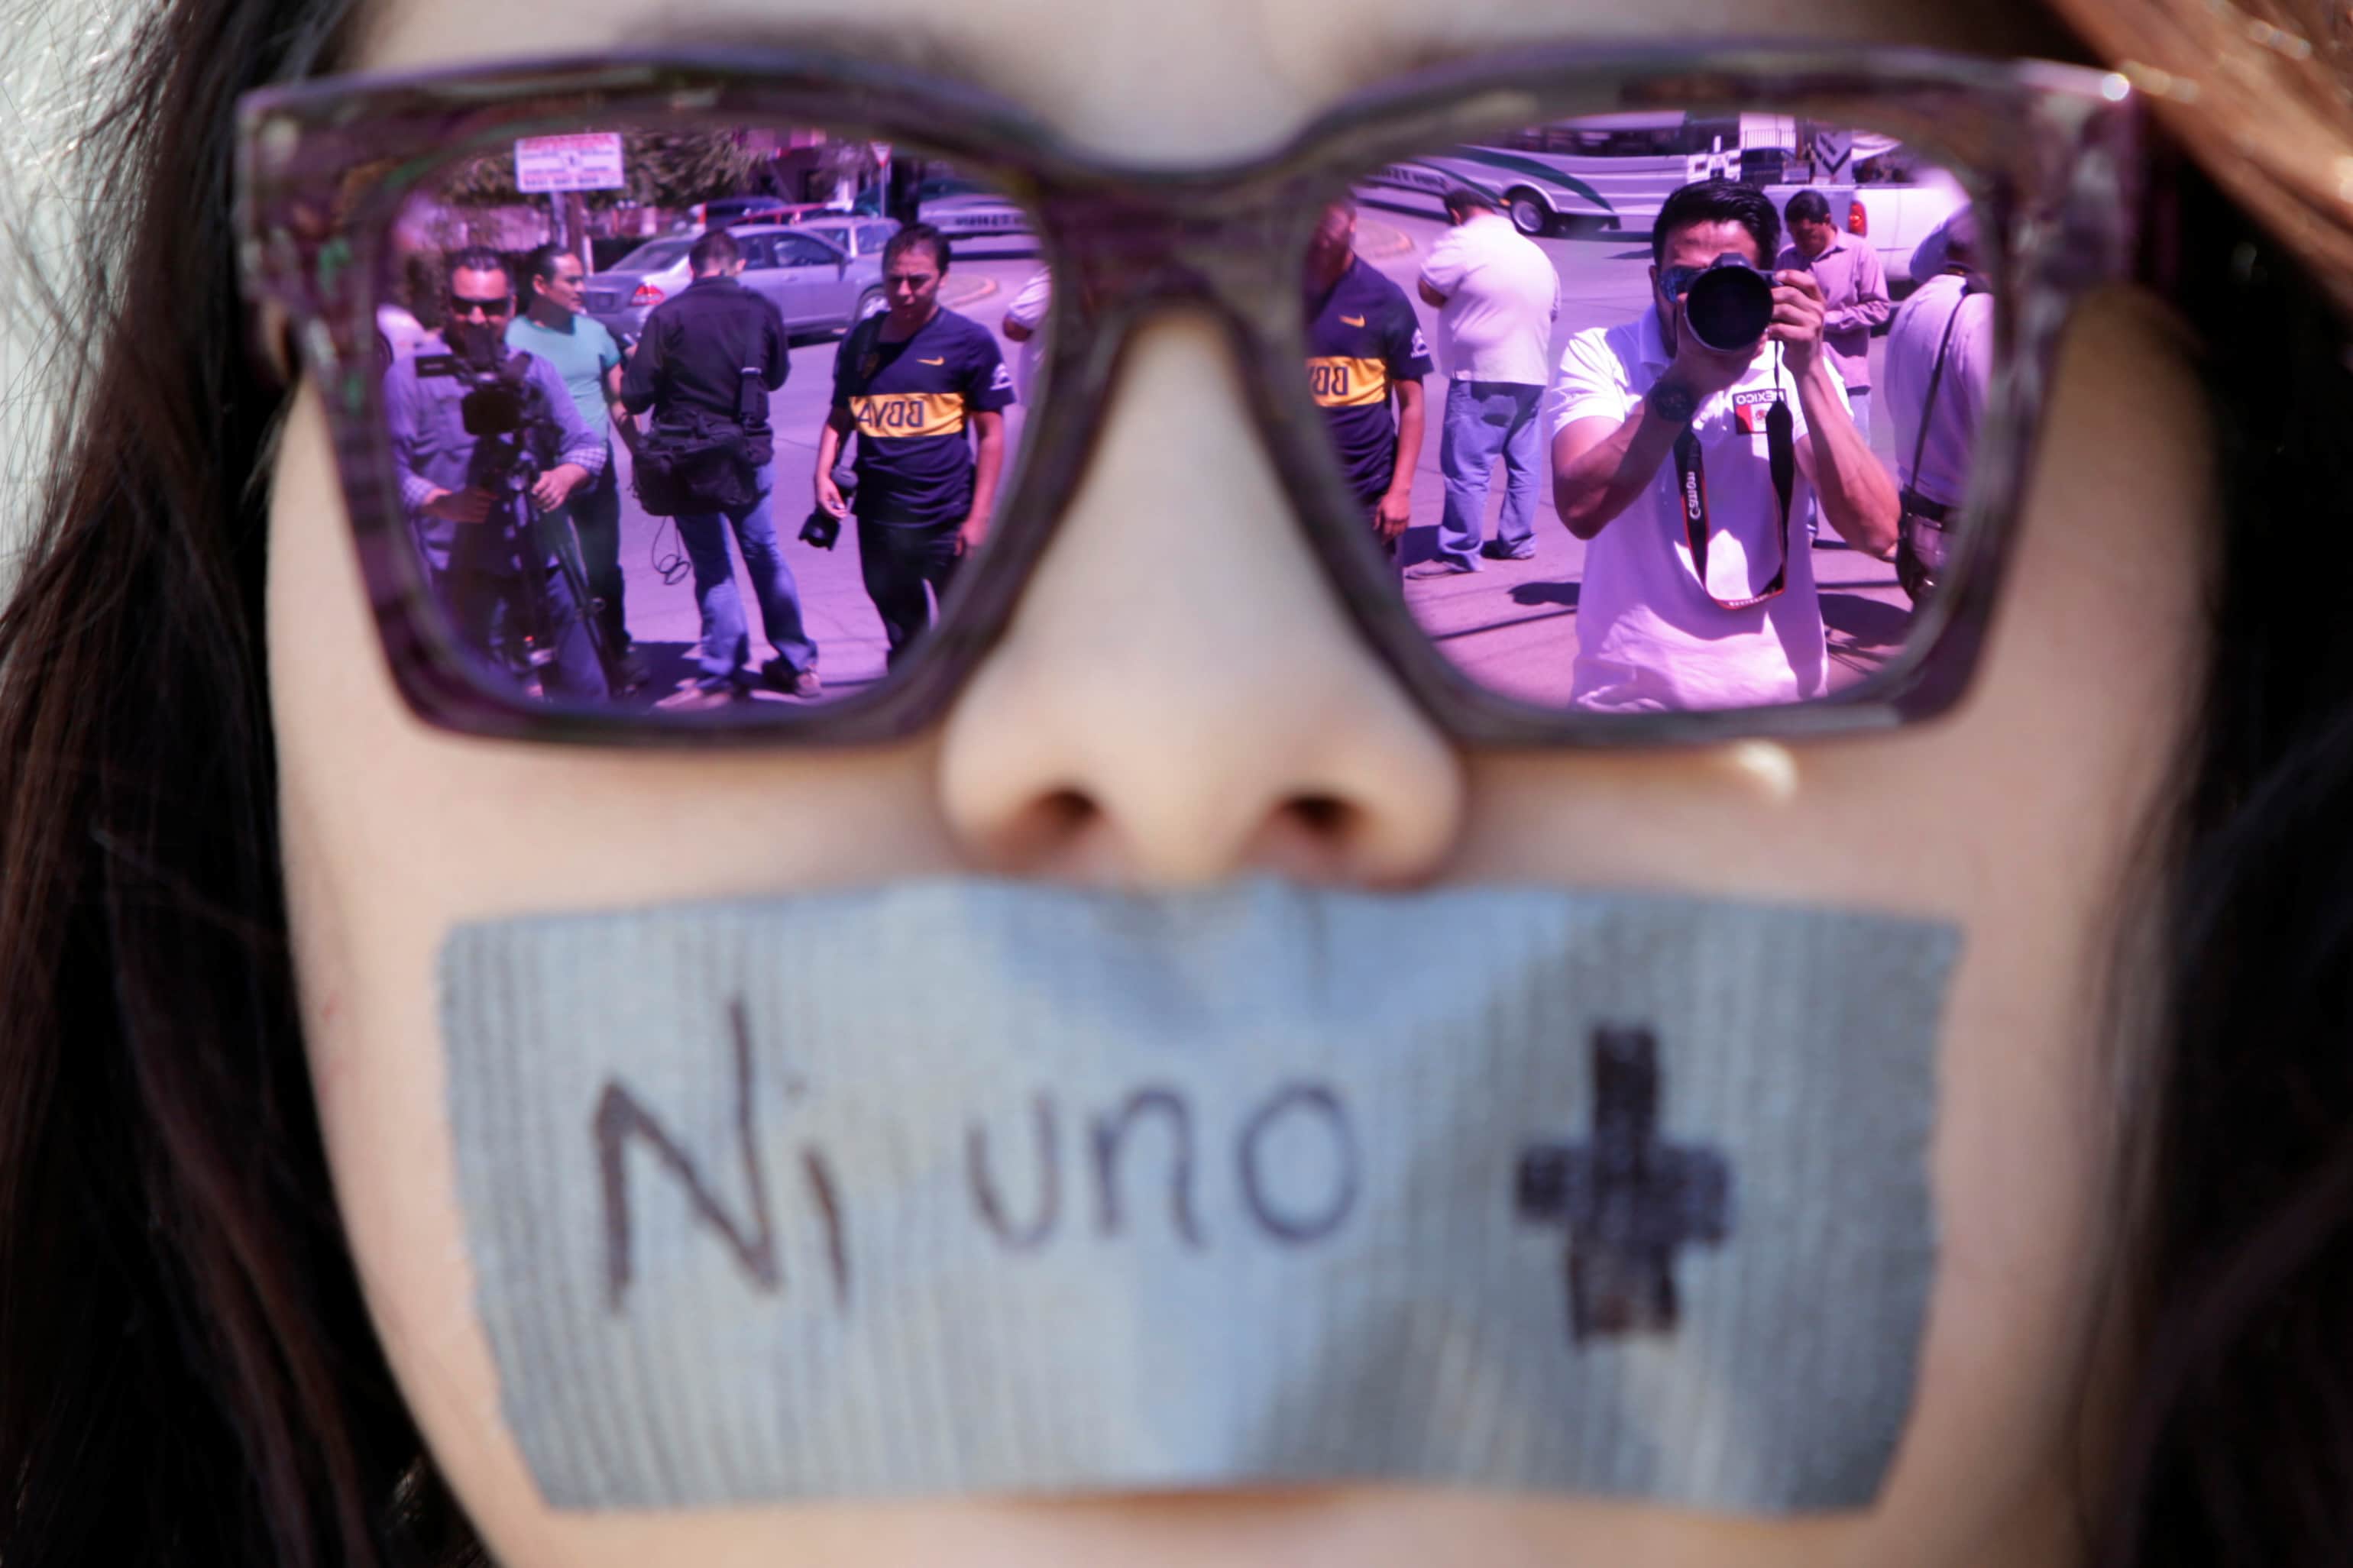 Journalists are reflected on the sunglasses of a woman during a protest against the murder of journalist Miroslava Breach, in Ciudad Juarez, Mexico, 25 March 2017. The tape reads "Not one more" , REUTERS/Jose Luis Gonzalez